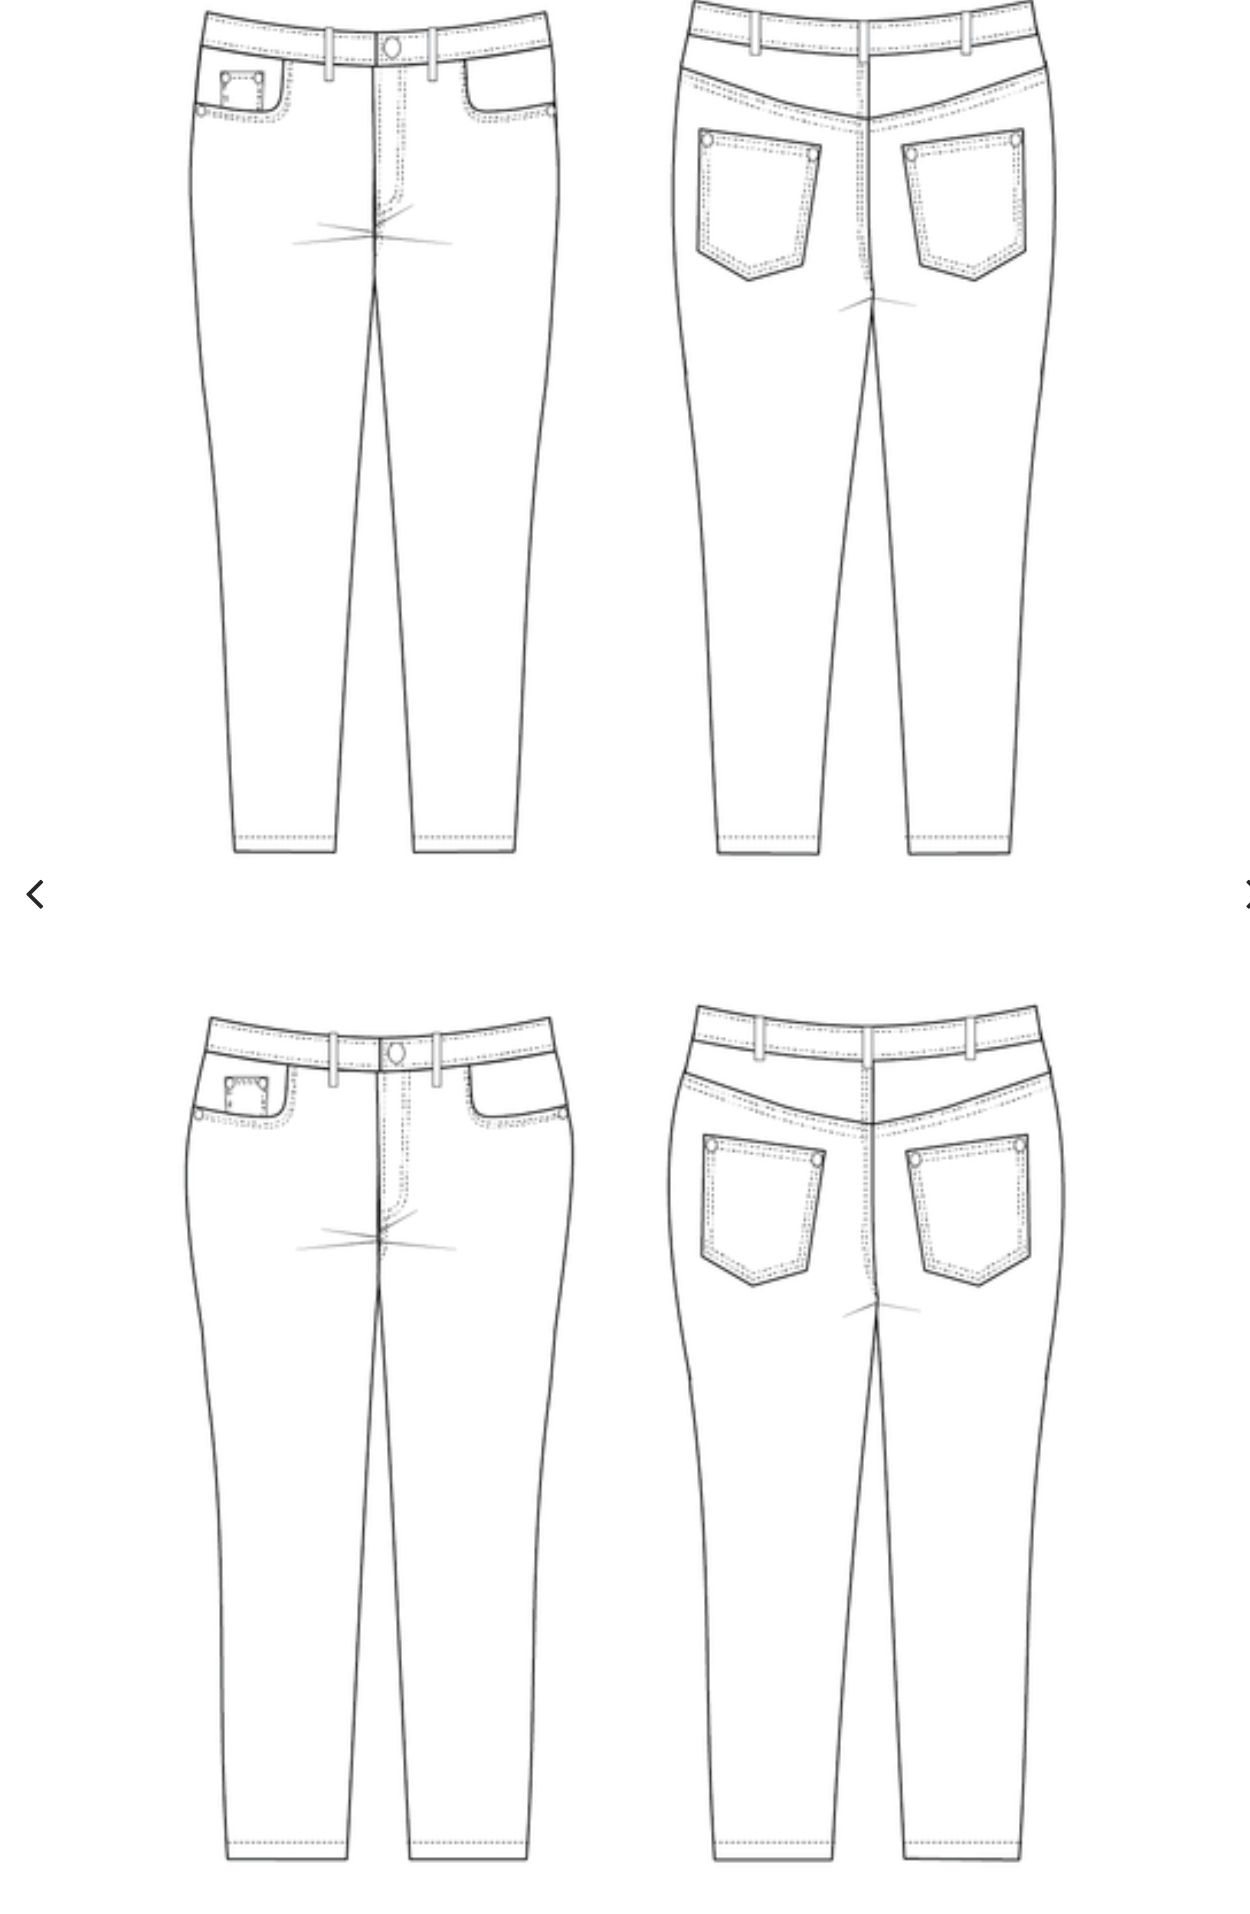 ALMOST LONG TROUSERS PATTERN